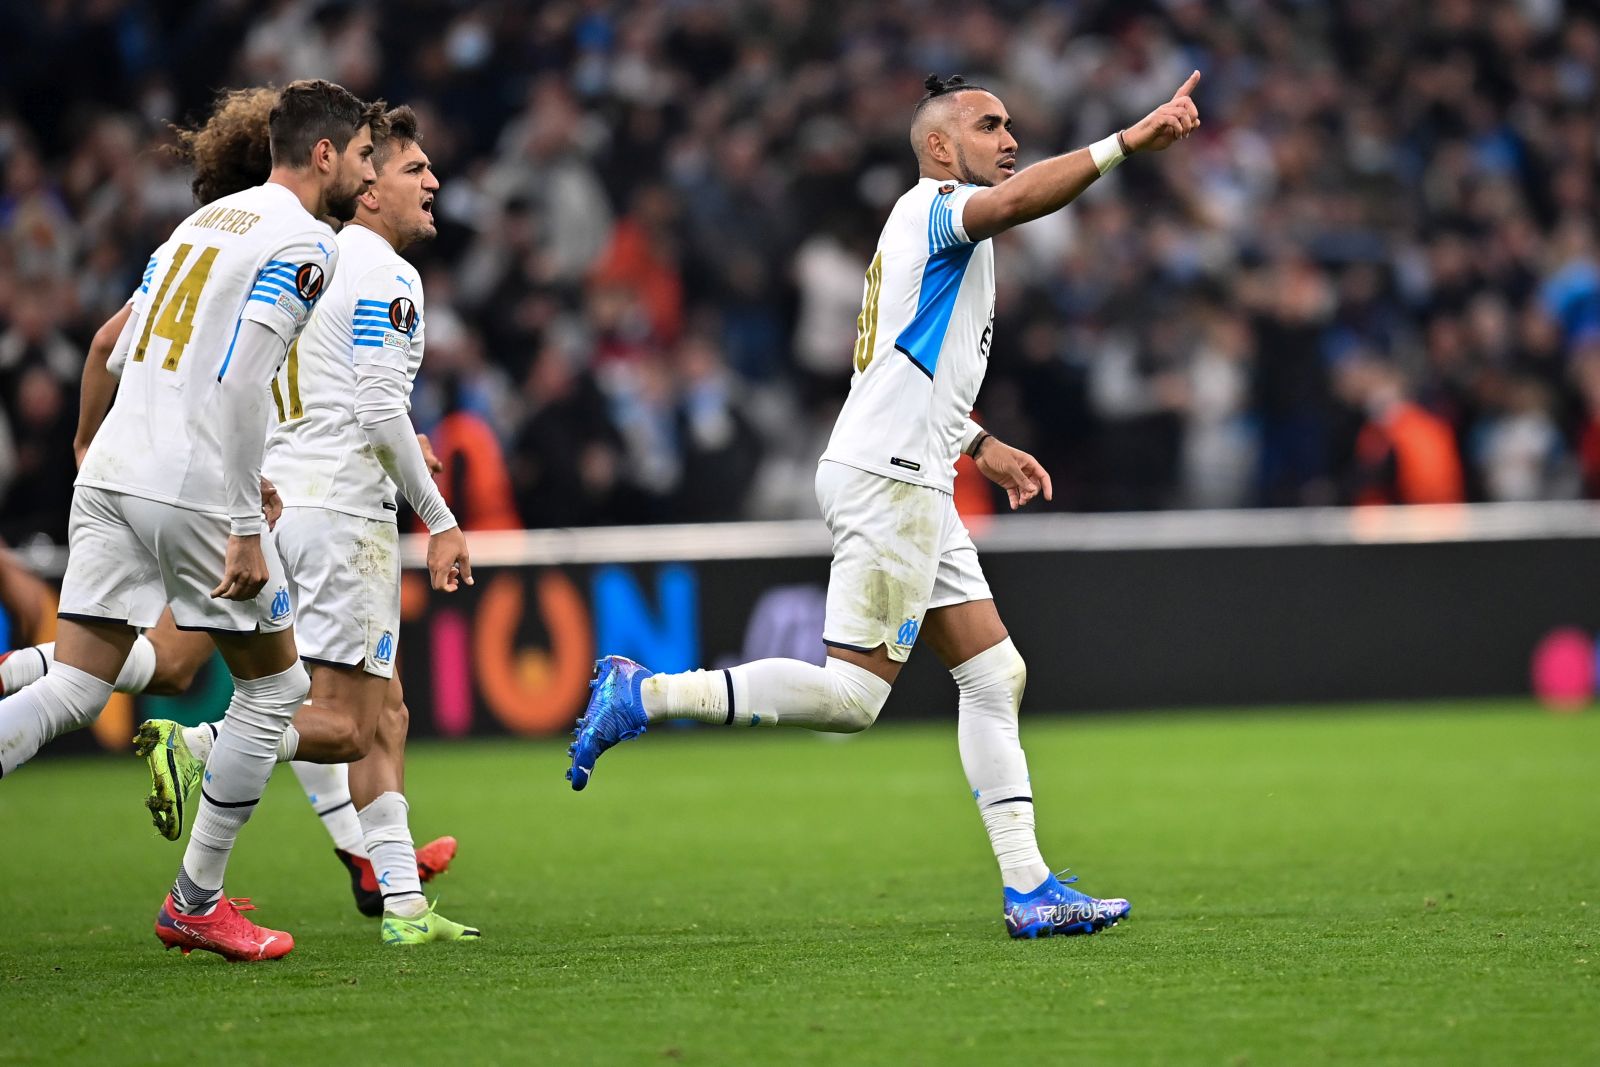 epa09565076 Dimitri PAYET of Olympique Marseille celebrates scoring during the UEFA Europa League Group E soccer match between Olympique Marseille and SS Lazio at the Velodrome Stadium in Marseille, southern France, 04 November 2021.  EPA/ALEXANDRE DIMOU